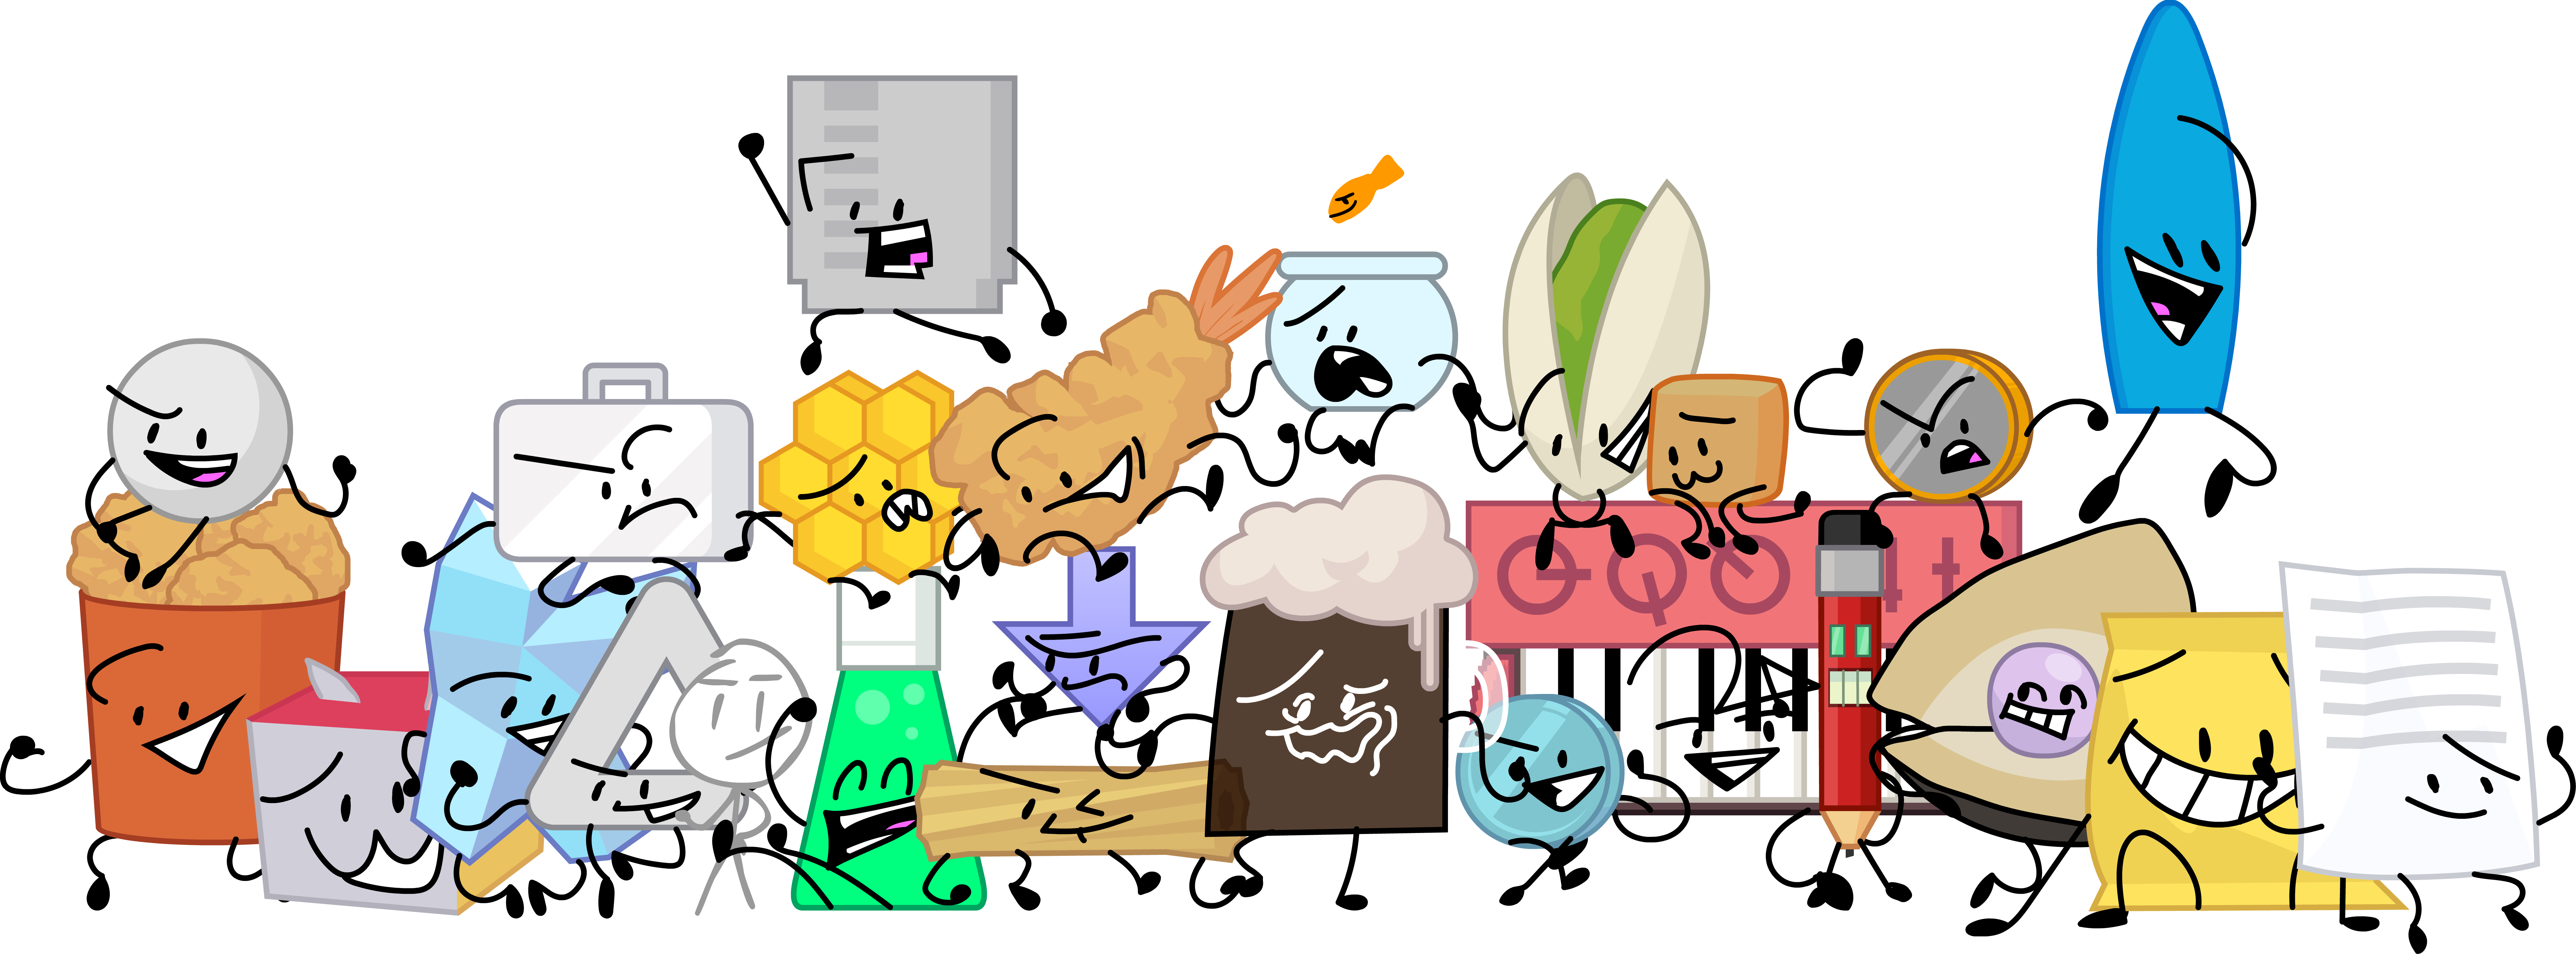 How To Download All Assets From Bfdi - Colaboratory